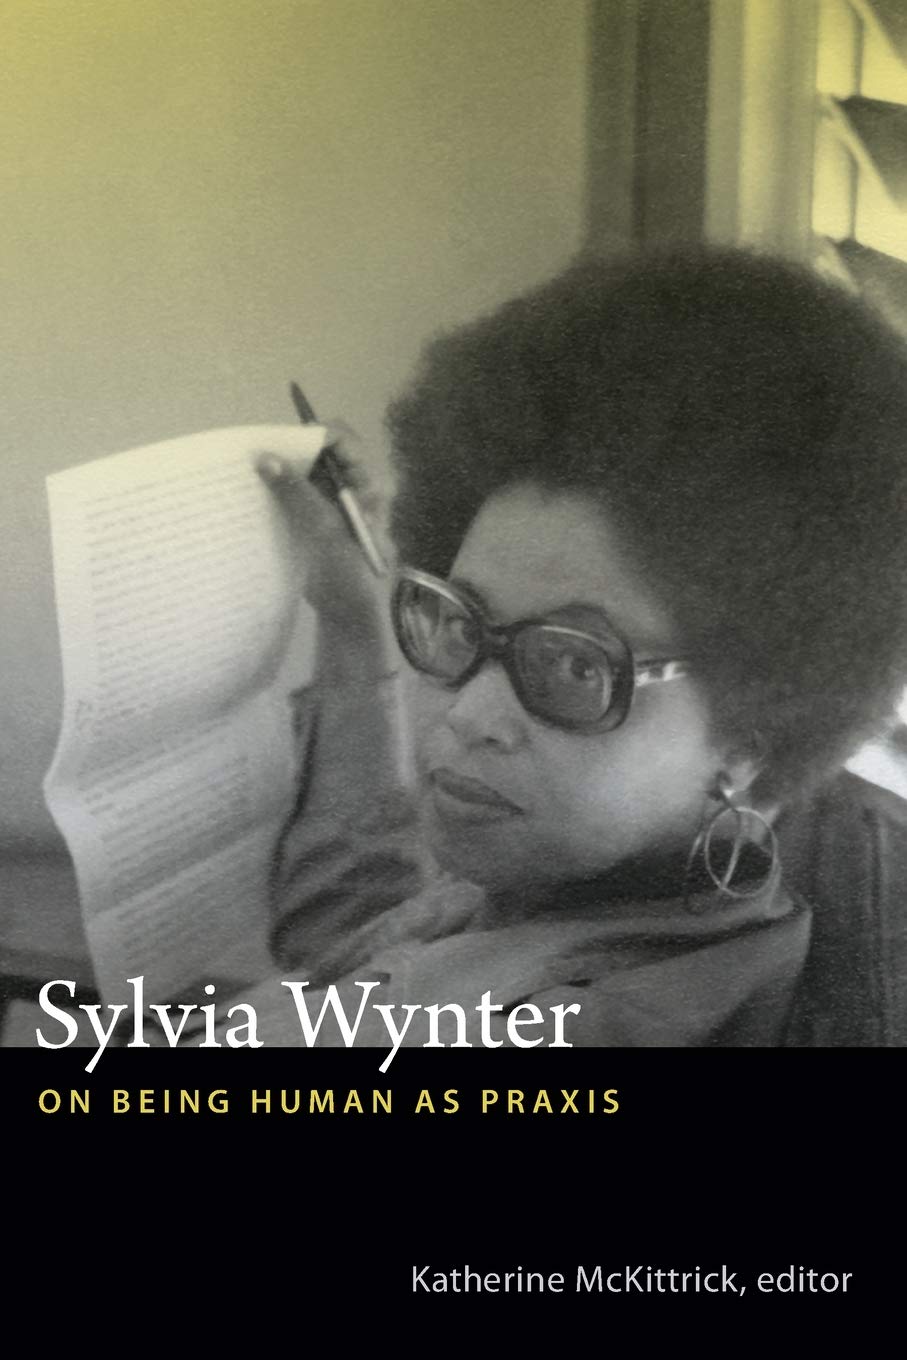 Sylvia Wynter: On Being Human as Praxis by Katherine McKittrick